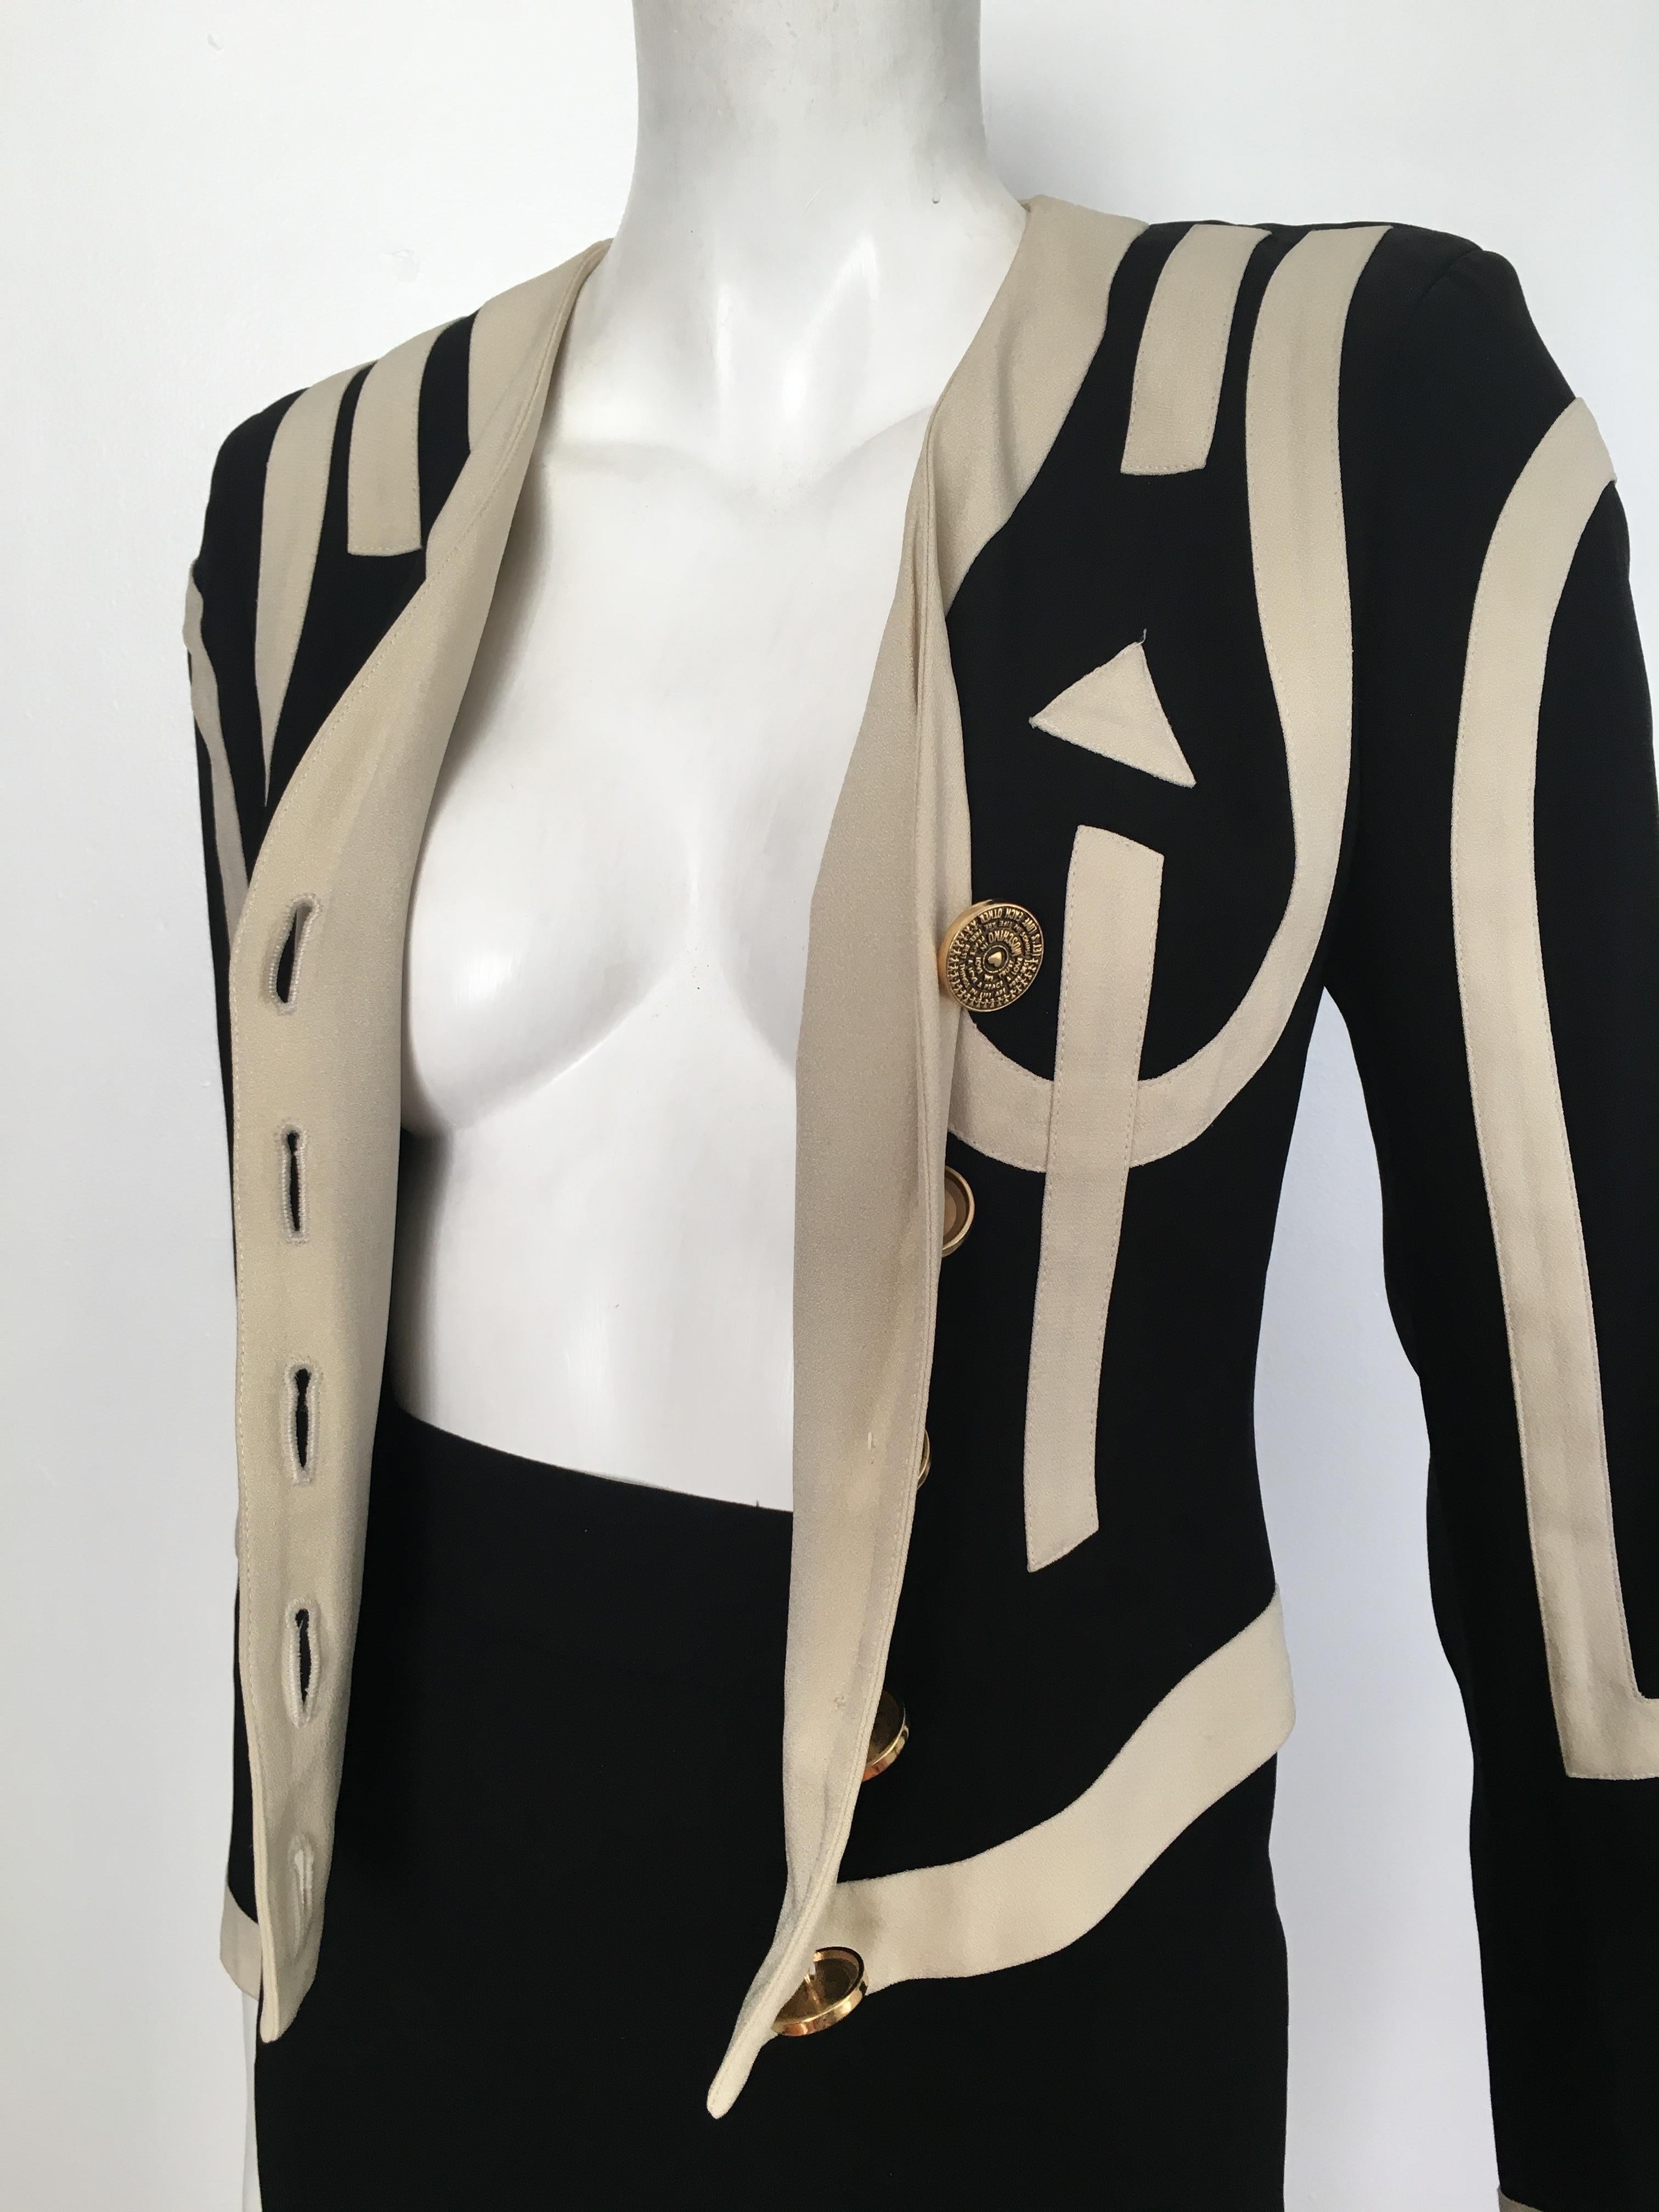 Moschino 1990s Black & Cream Jacket & Skirt Suit Size 4. For Sale 11